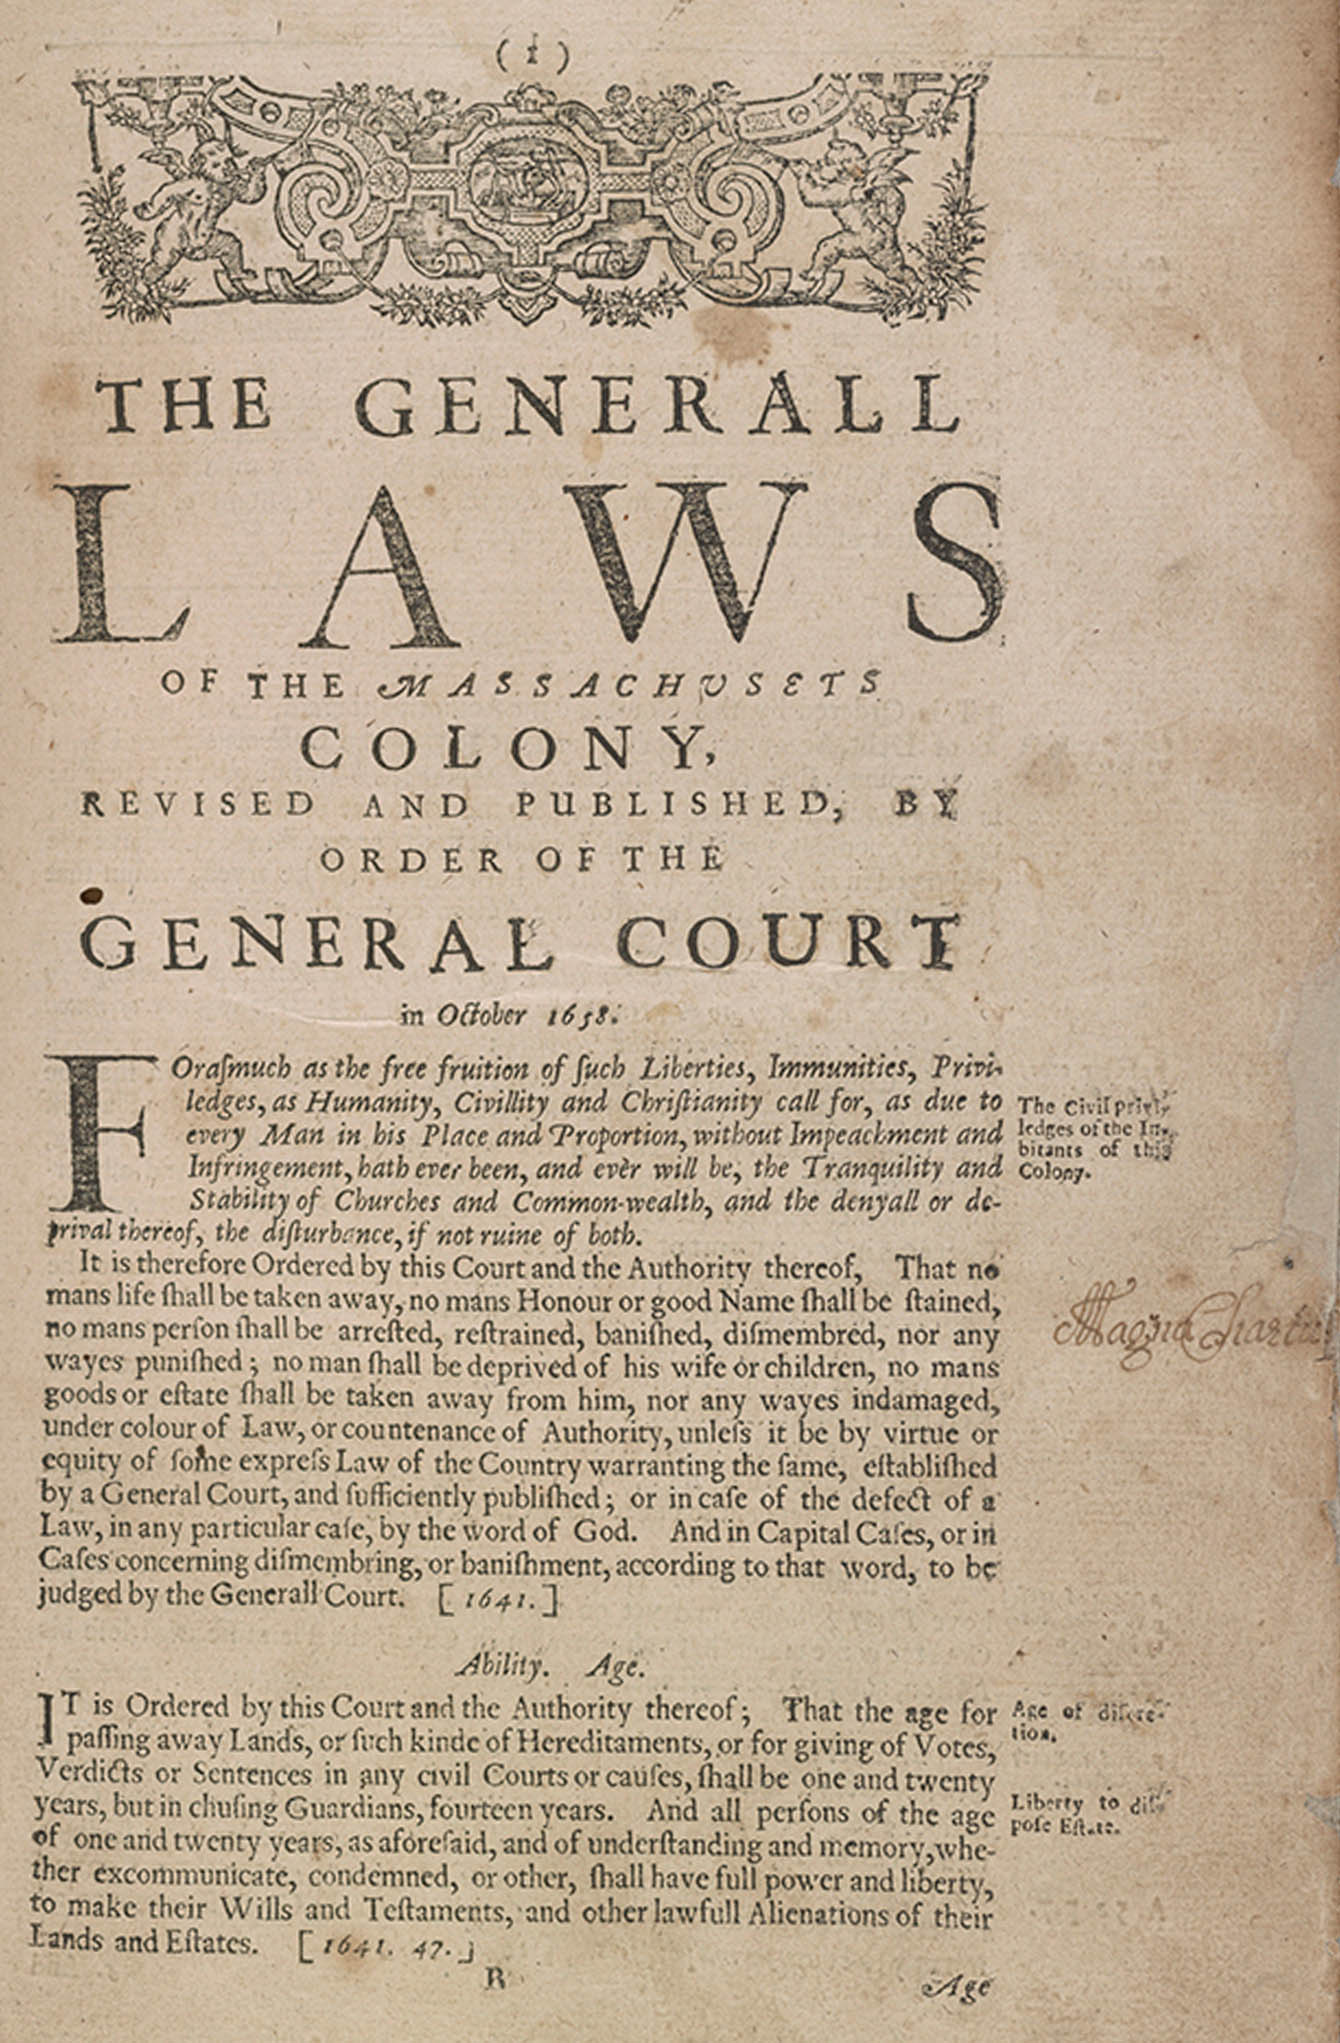 The Generall Laws and Liberties of the Massachusets Colony...